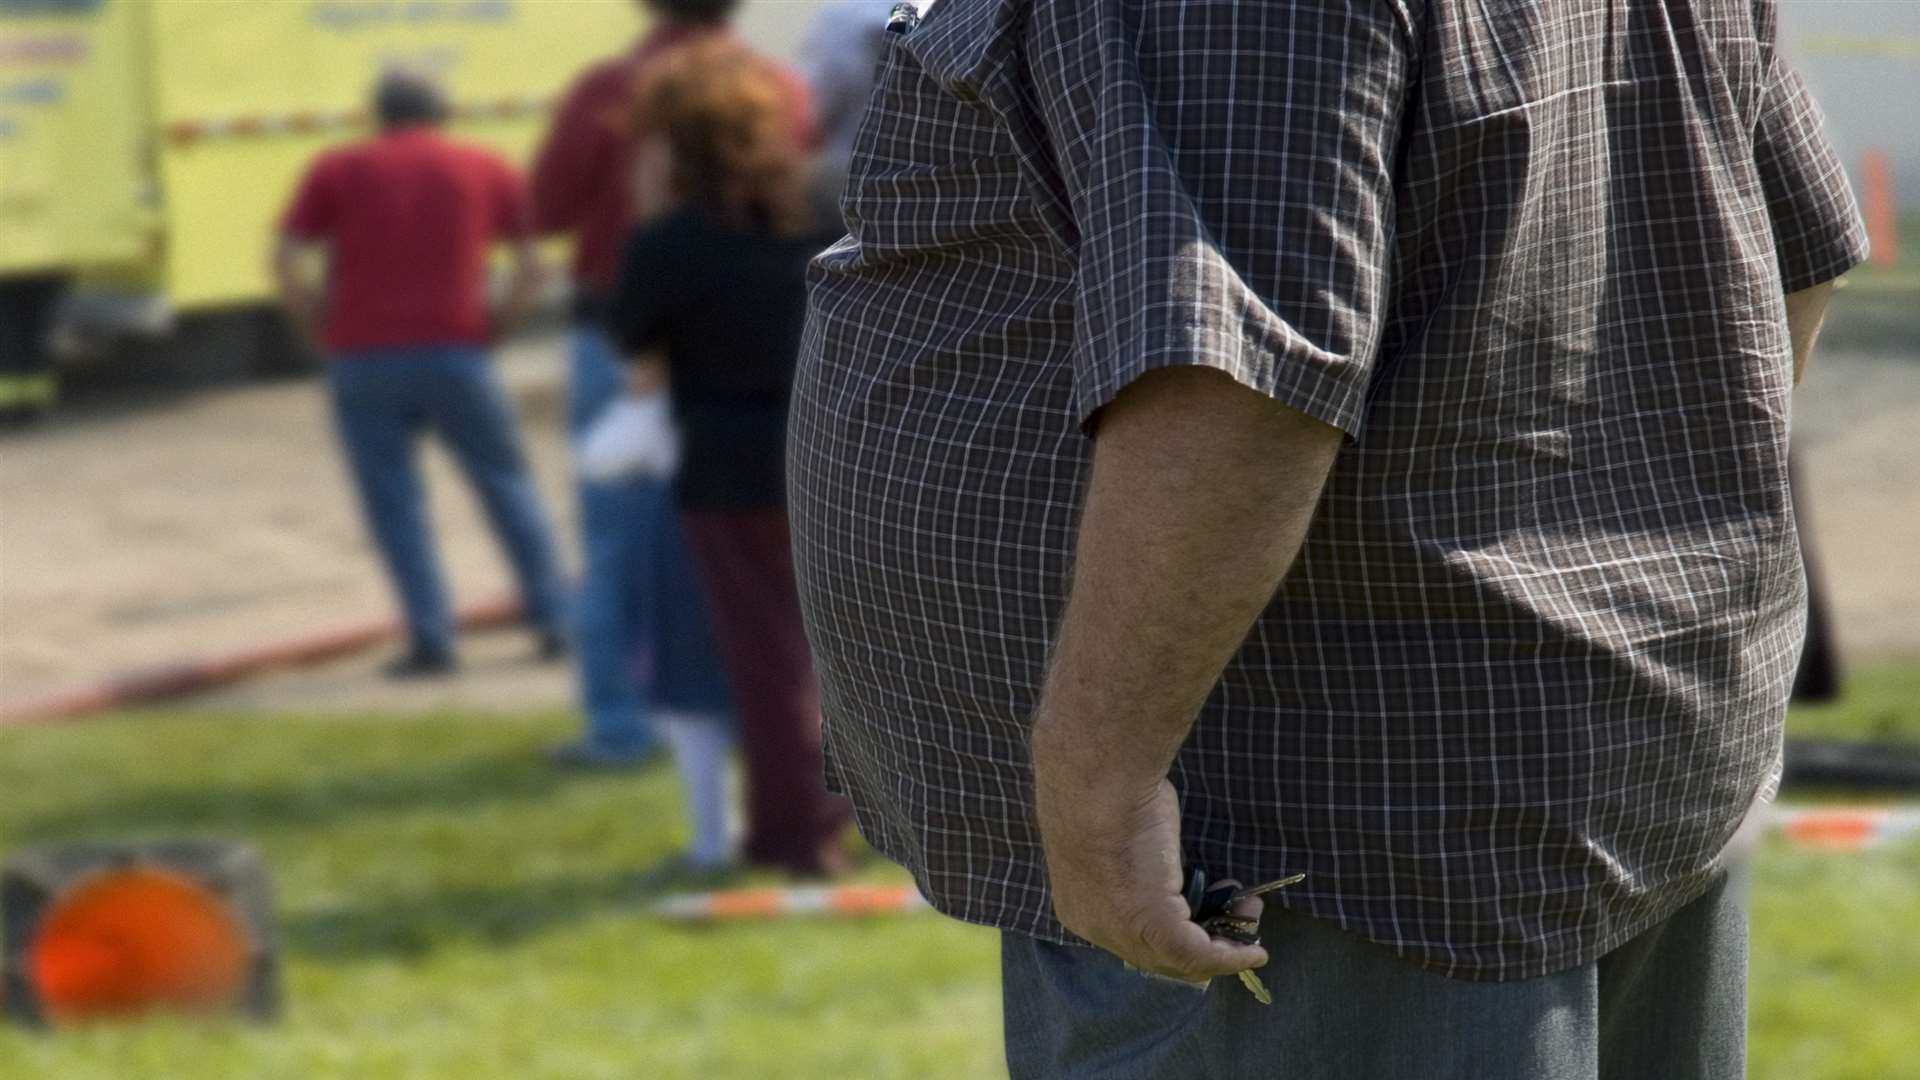 Sheppey people are piling on the pounds. Photo: iStock.com